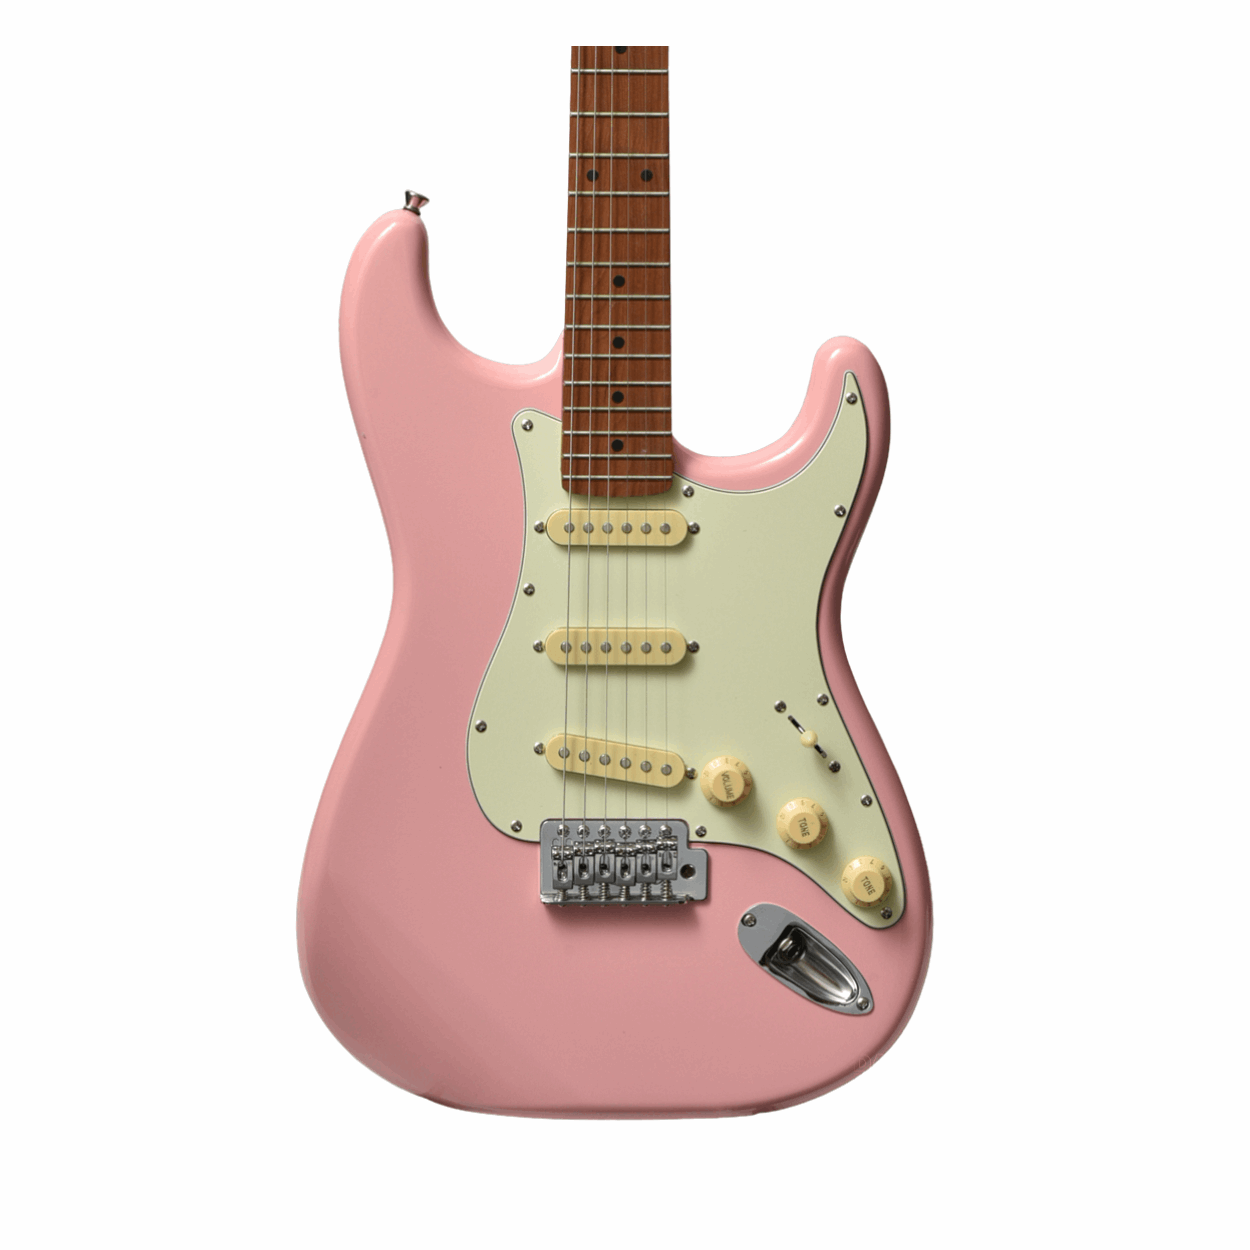 Bacchus Bst-1-rsm/m-slpk Universe Series Roasted Maple Electric Guitar, Shell Pink With Bag